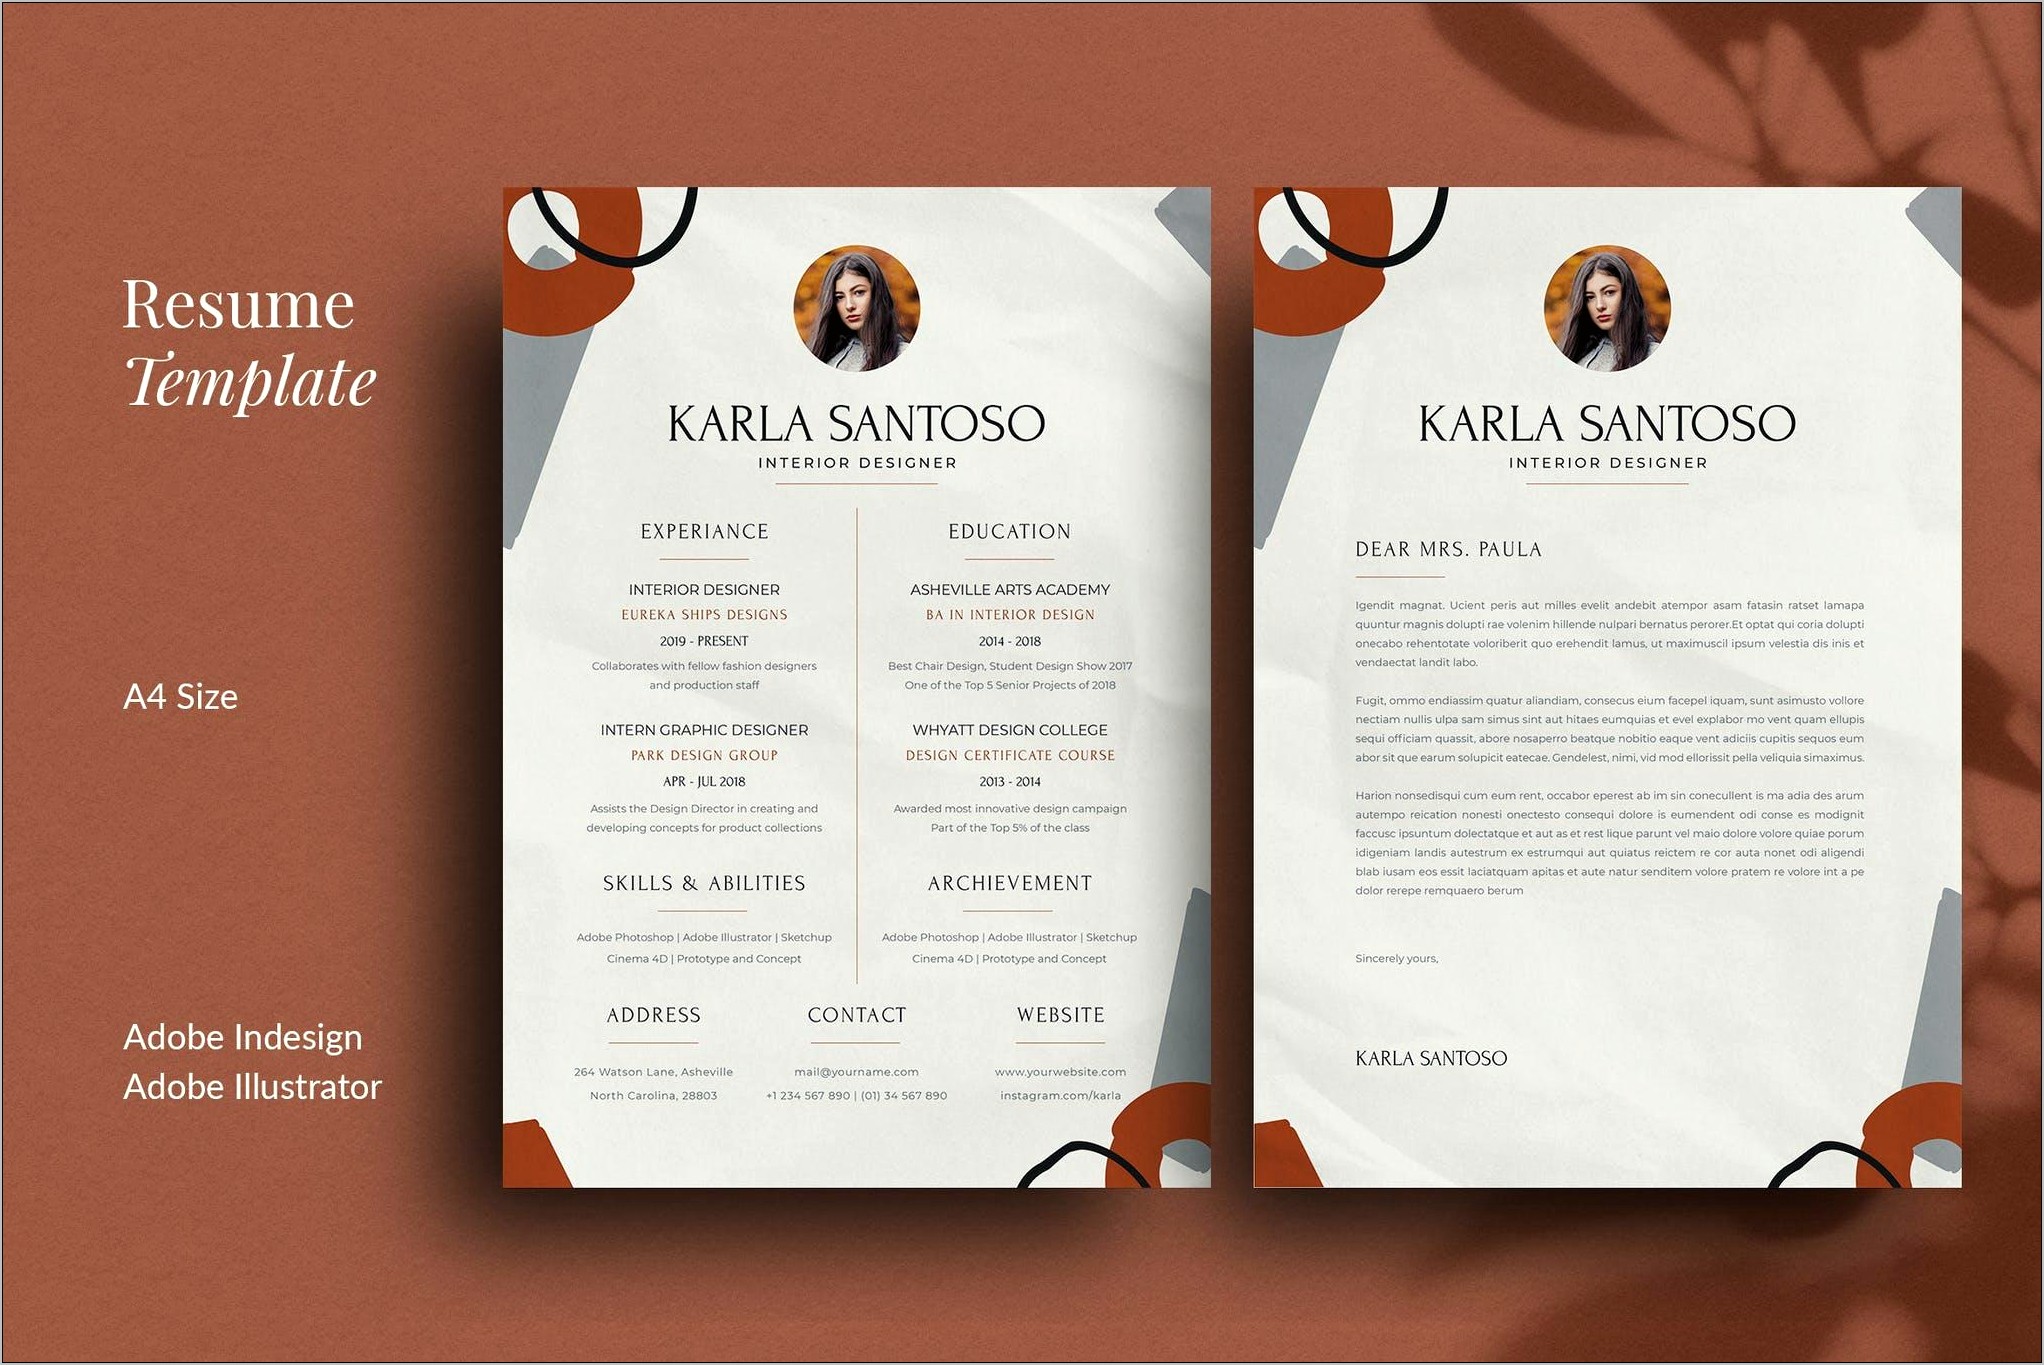 Best Resume For Creative Director